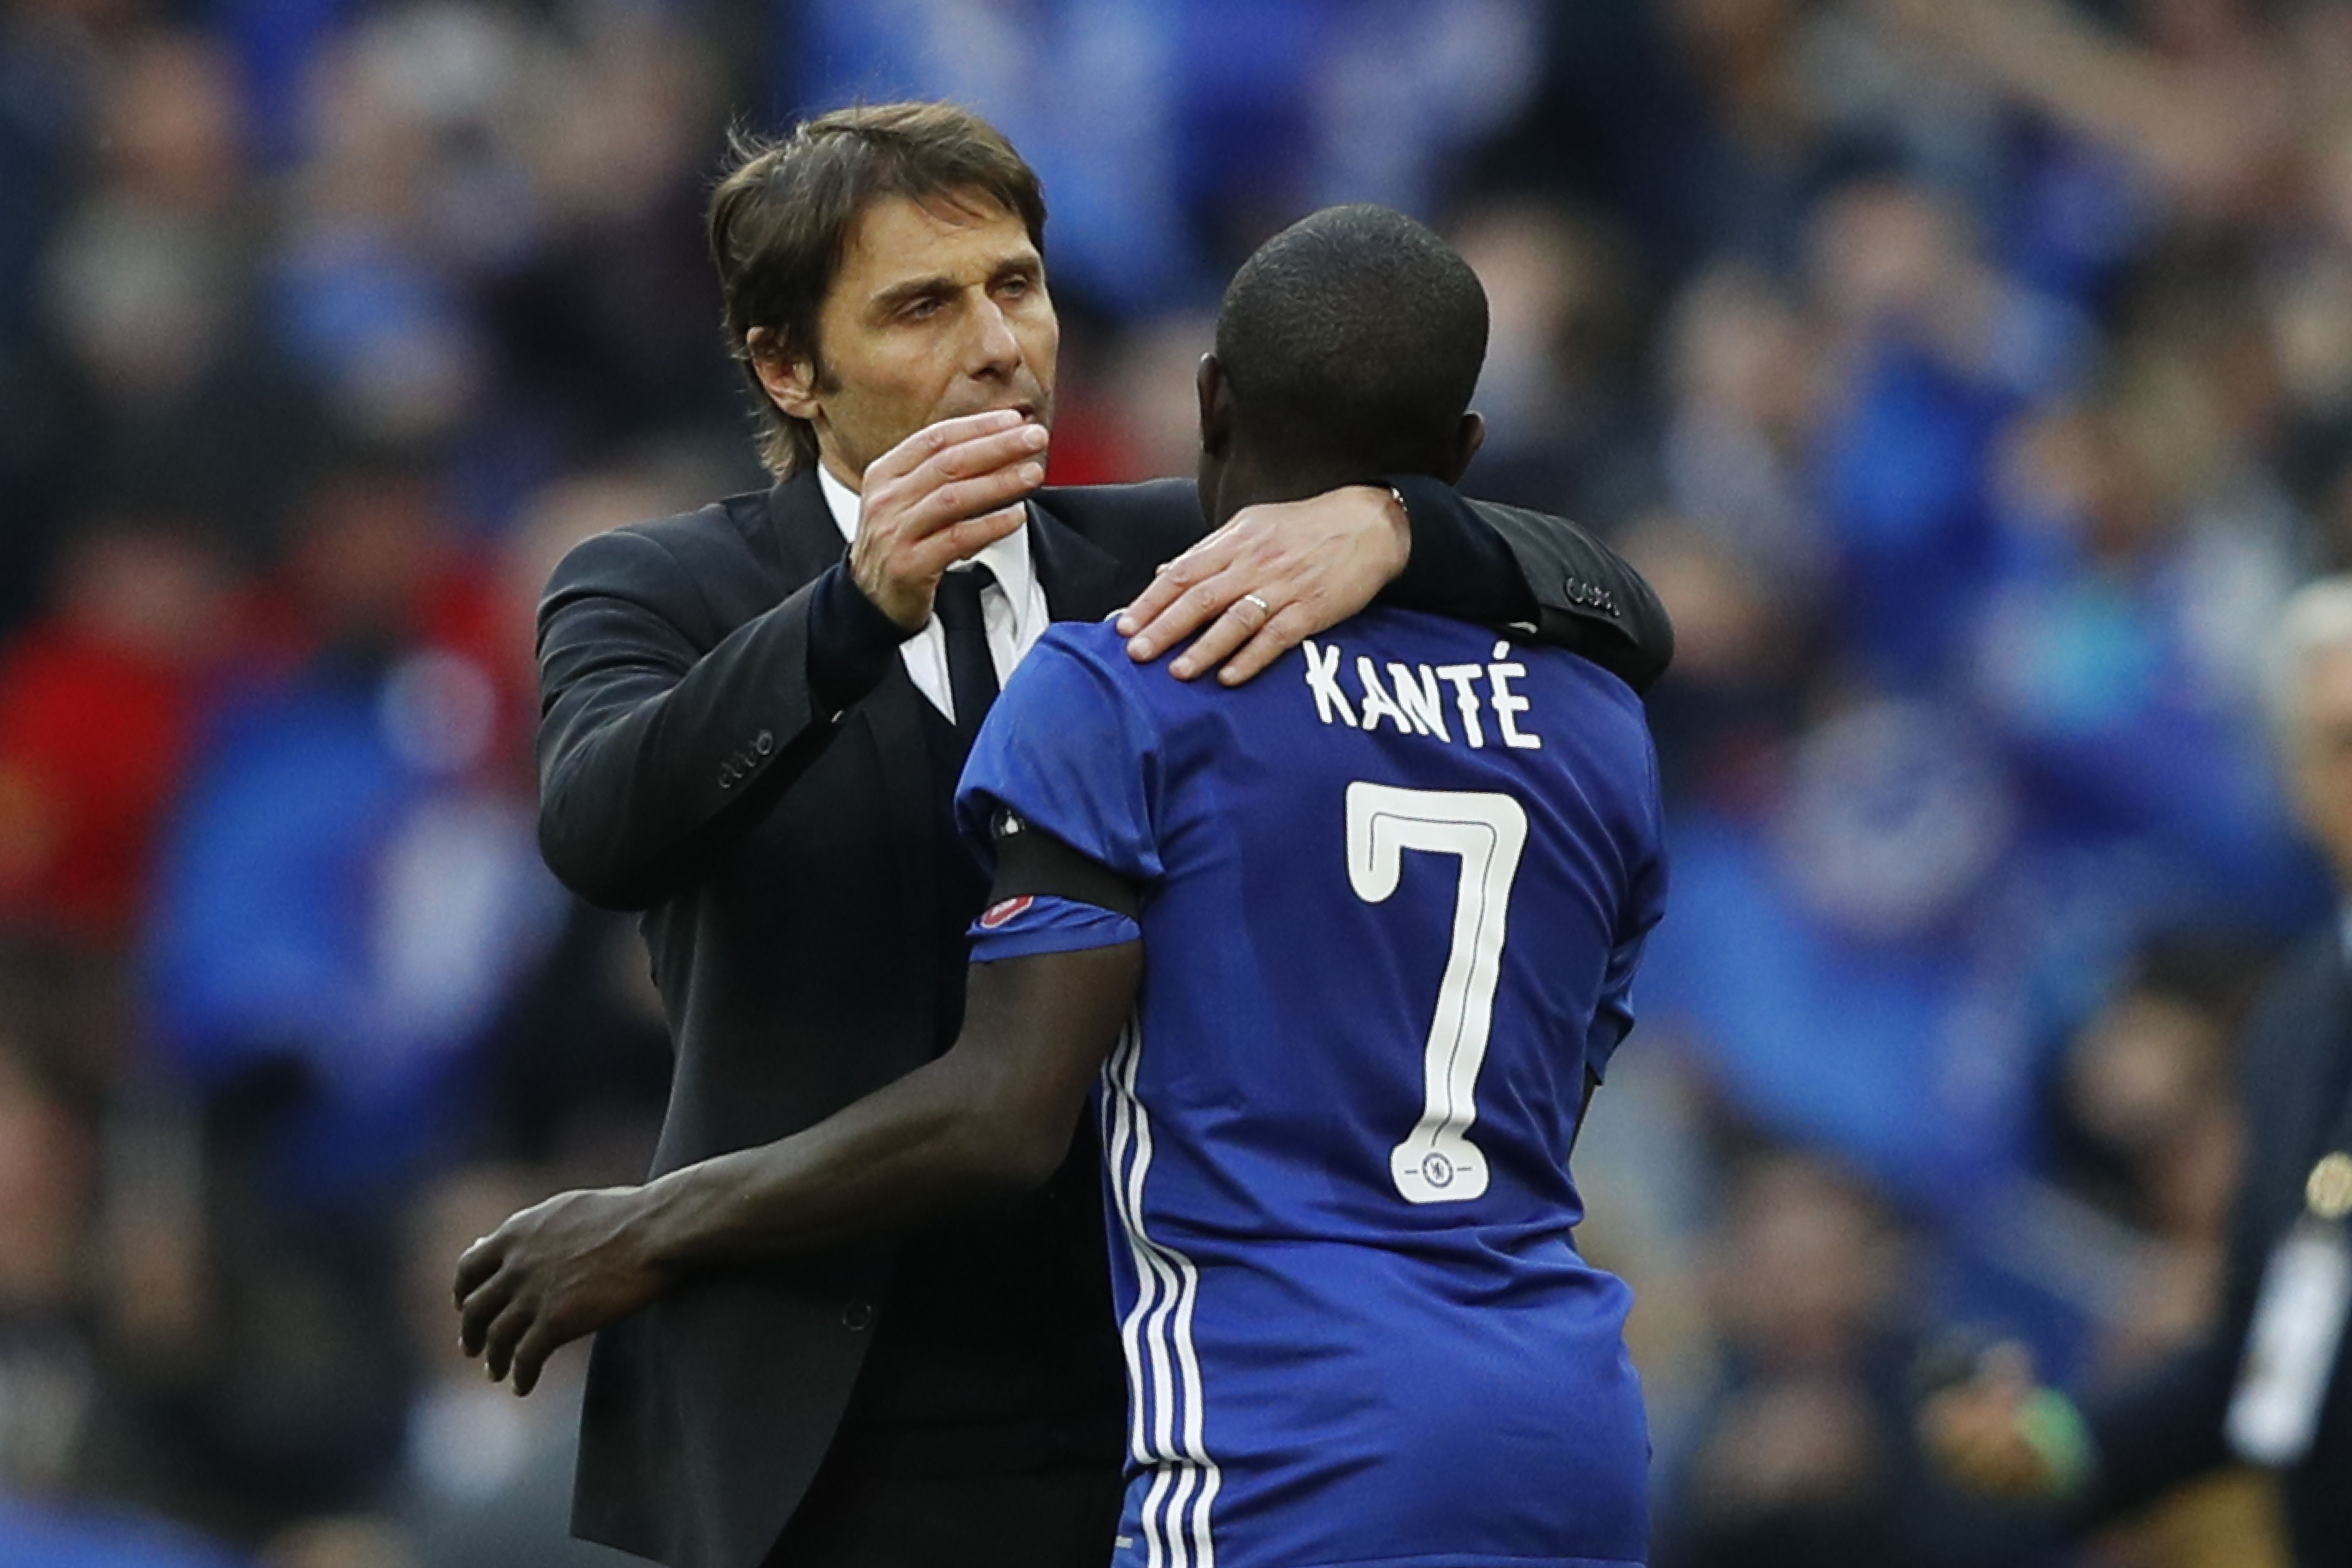 Will we see Antonio Conte manage Kante again? (Photo by Adrian Dennis/AFP/Getty Images)